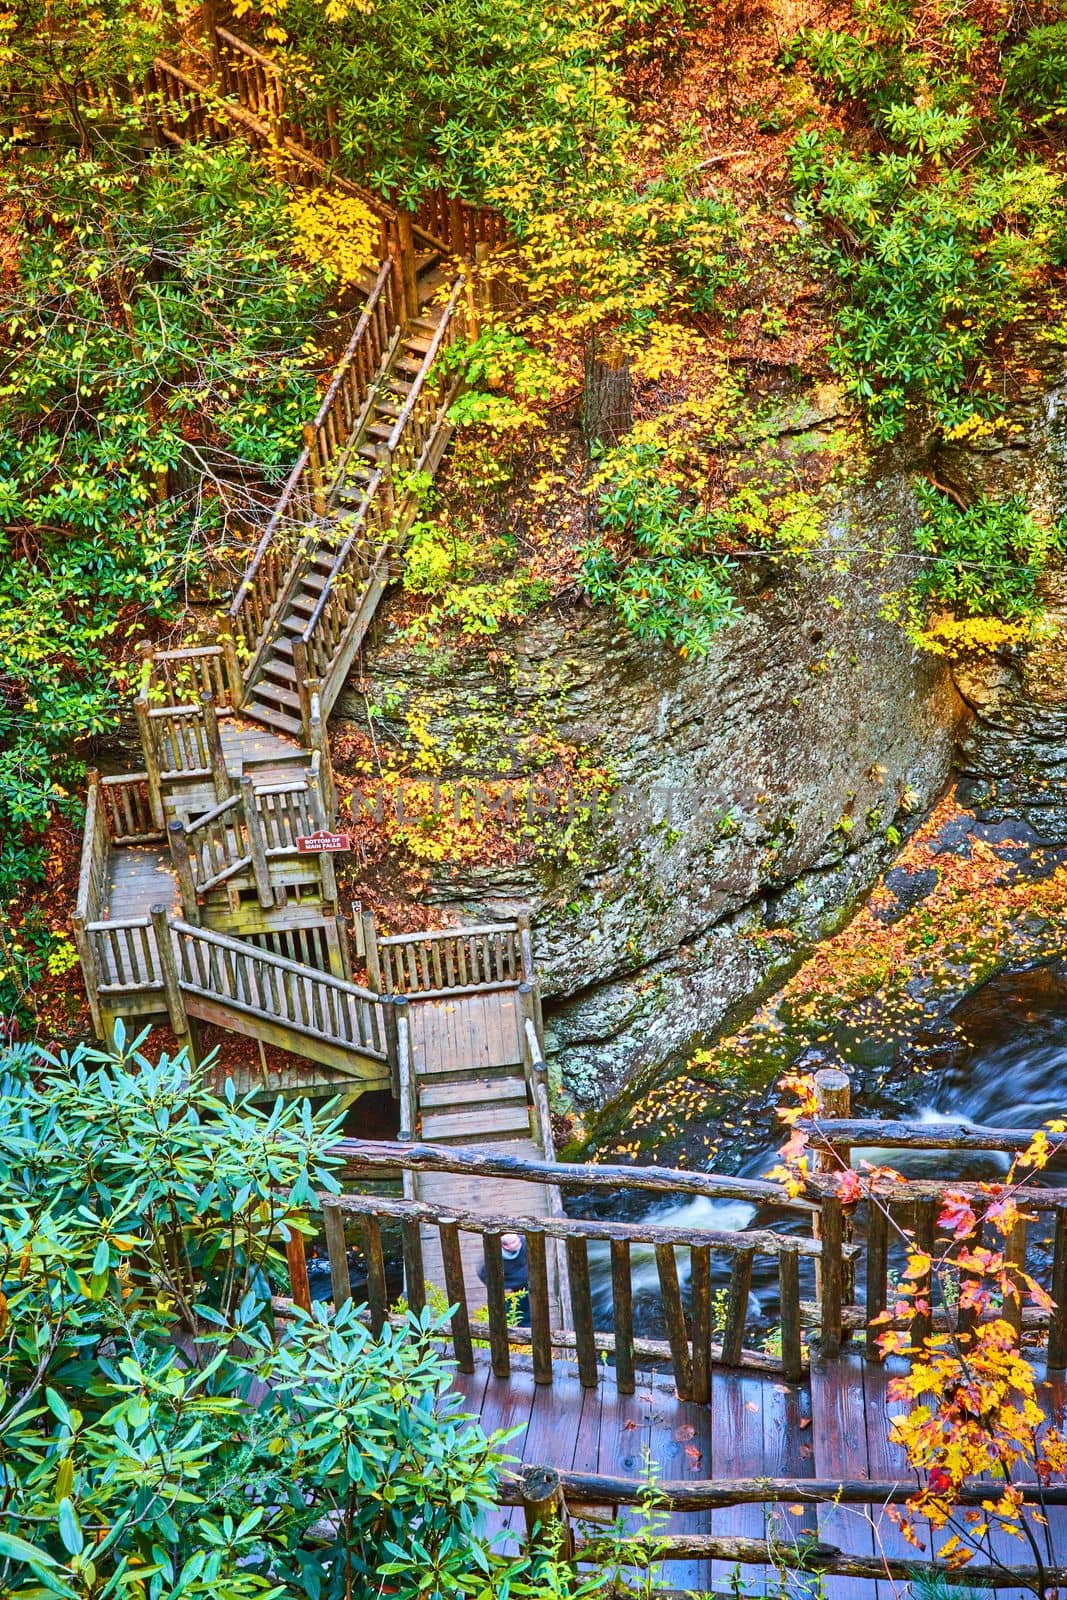 Image of Endless boardwalk stairs across river and up cliffs surrounded by fall foliage